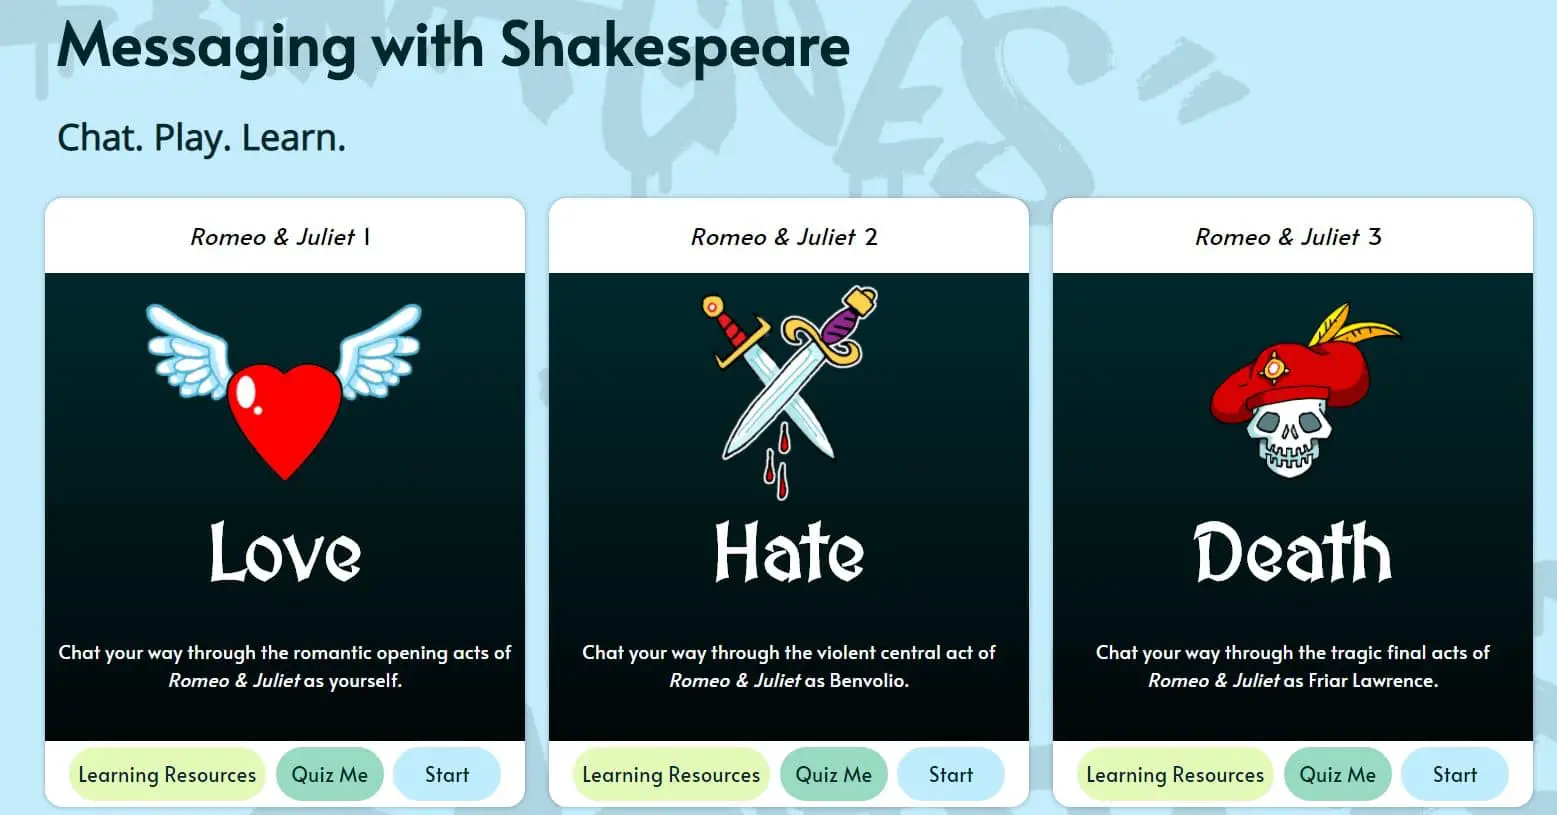 9 Of The Best Shakespeare Translator Tools and Apps